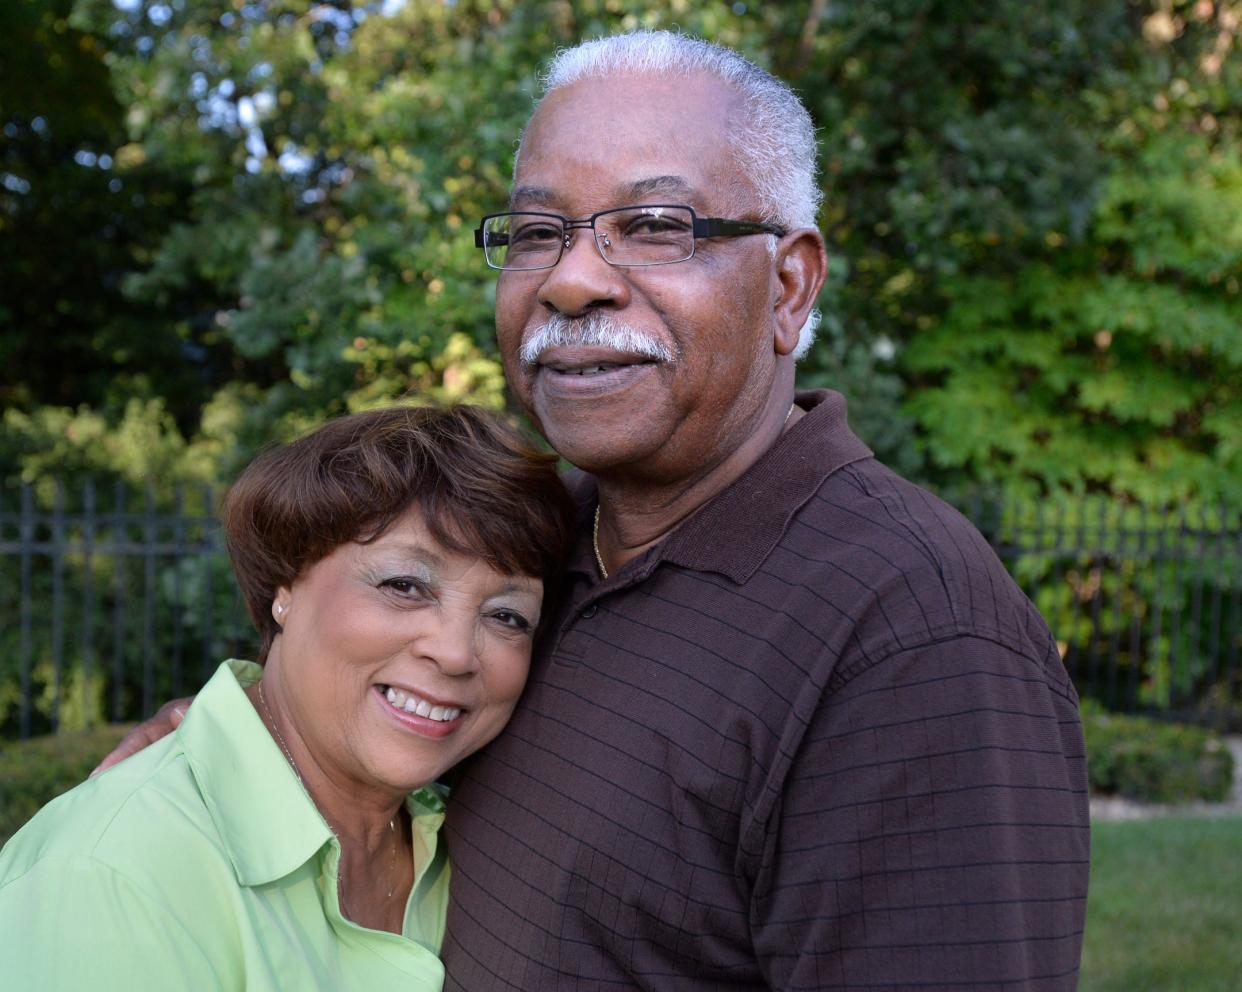 Roscoe and Geri McCall, pictured here on Aug. 23, 2013, were married for 59 years. Roscoe McCall died Dec. 15.